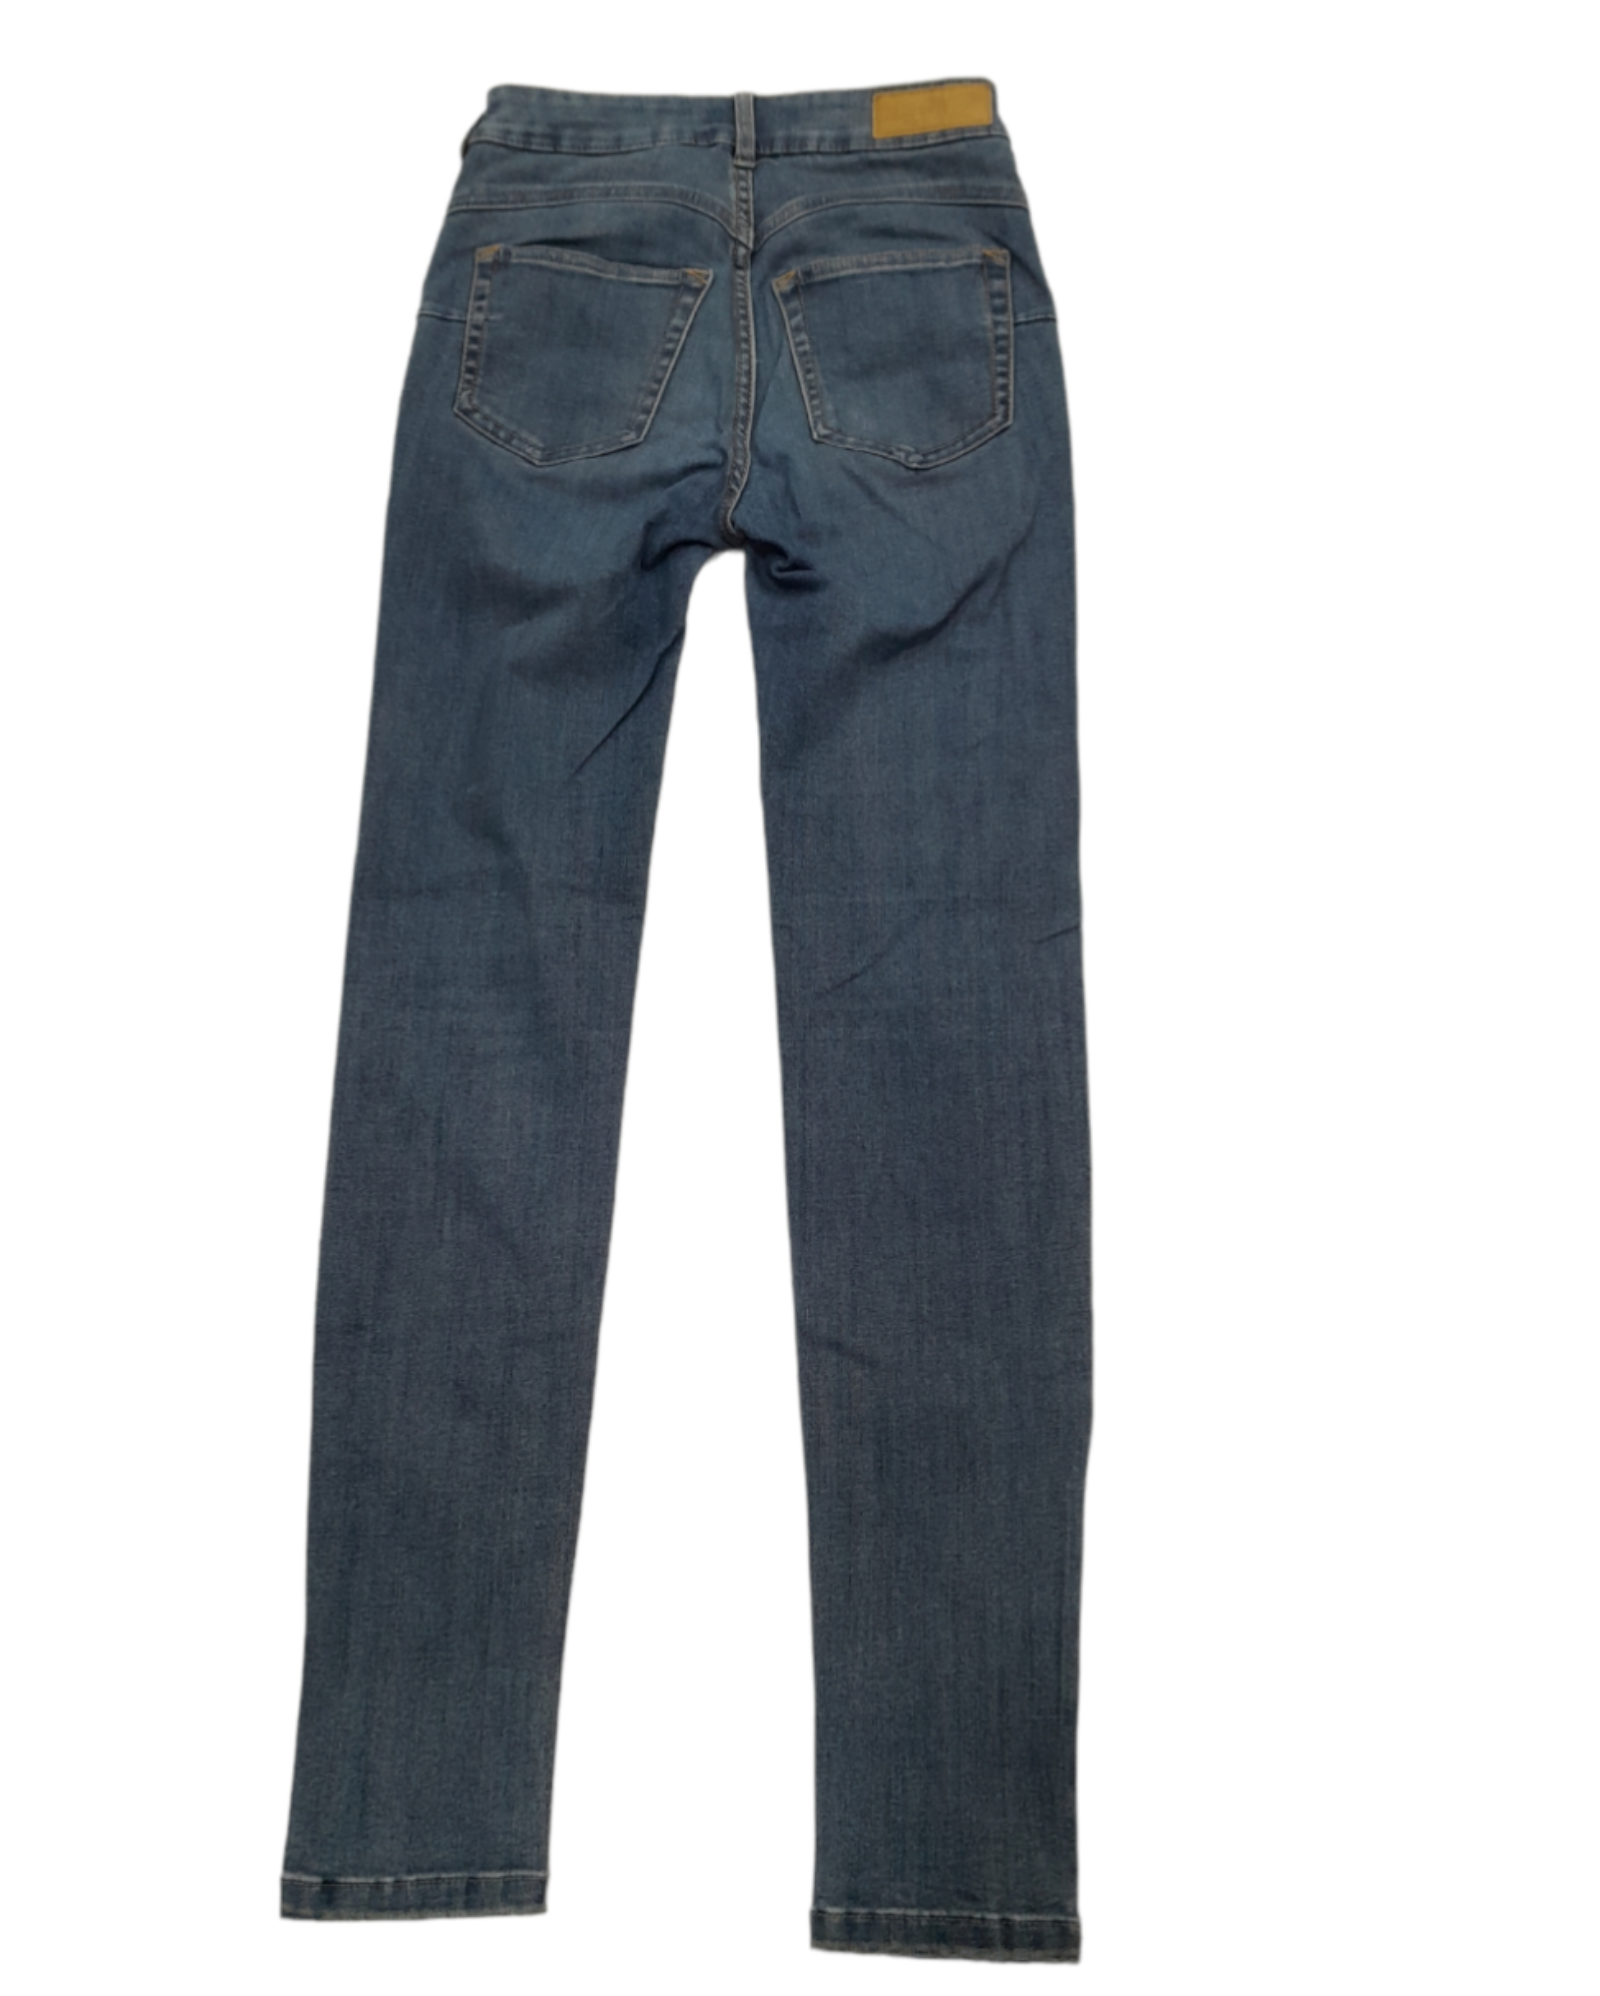 Jeans Skinny Pull and bear 